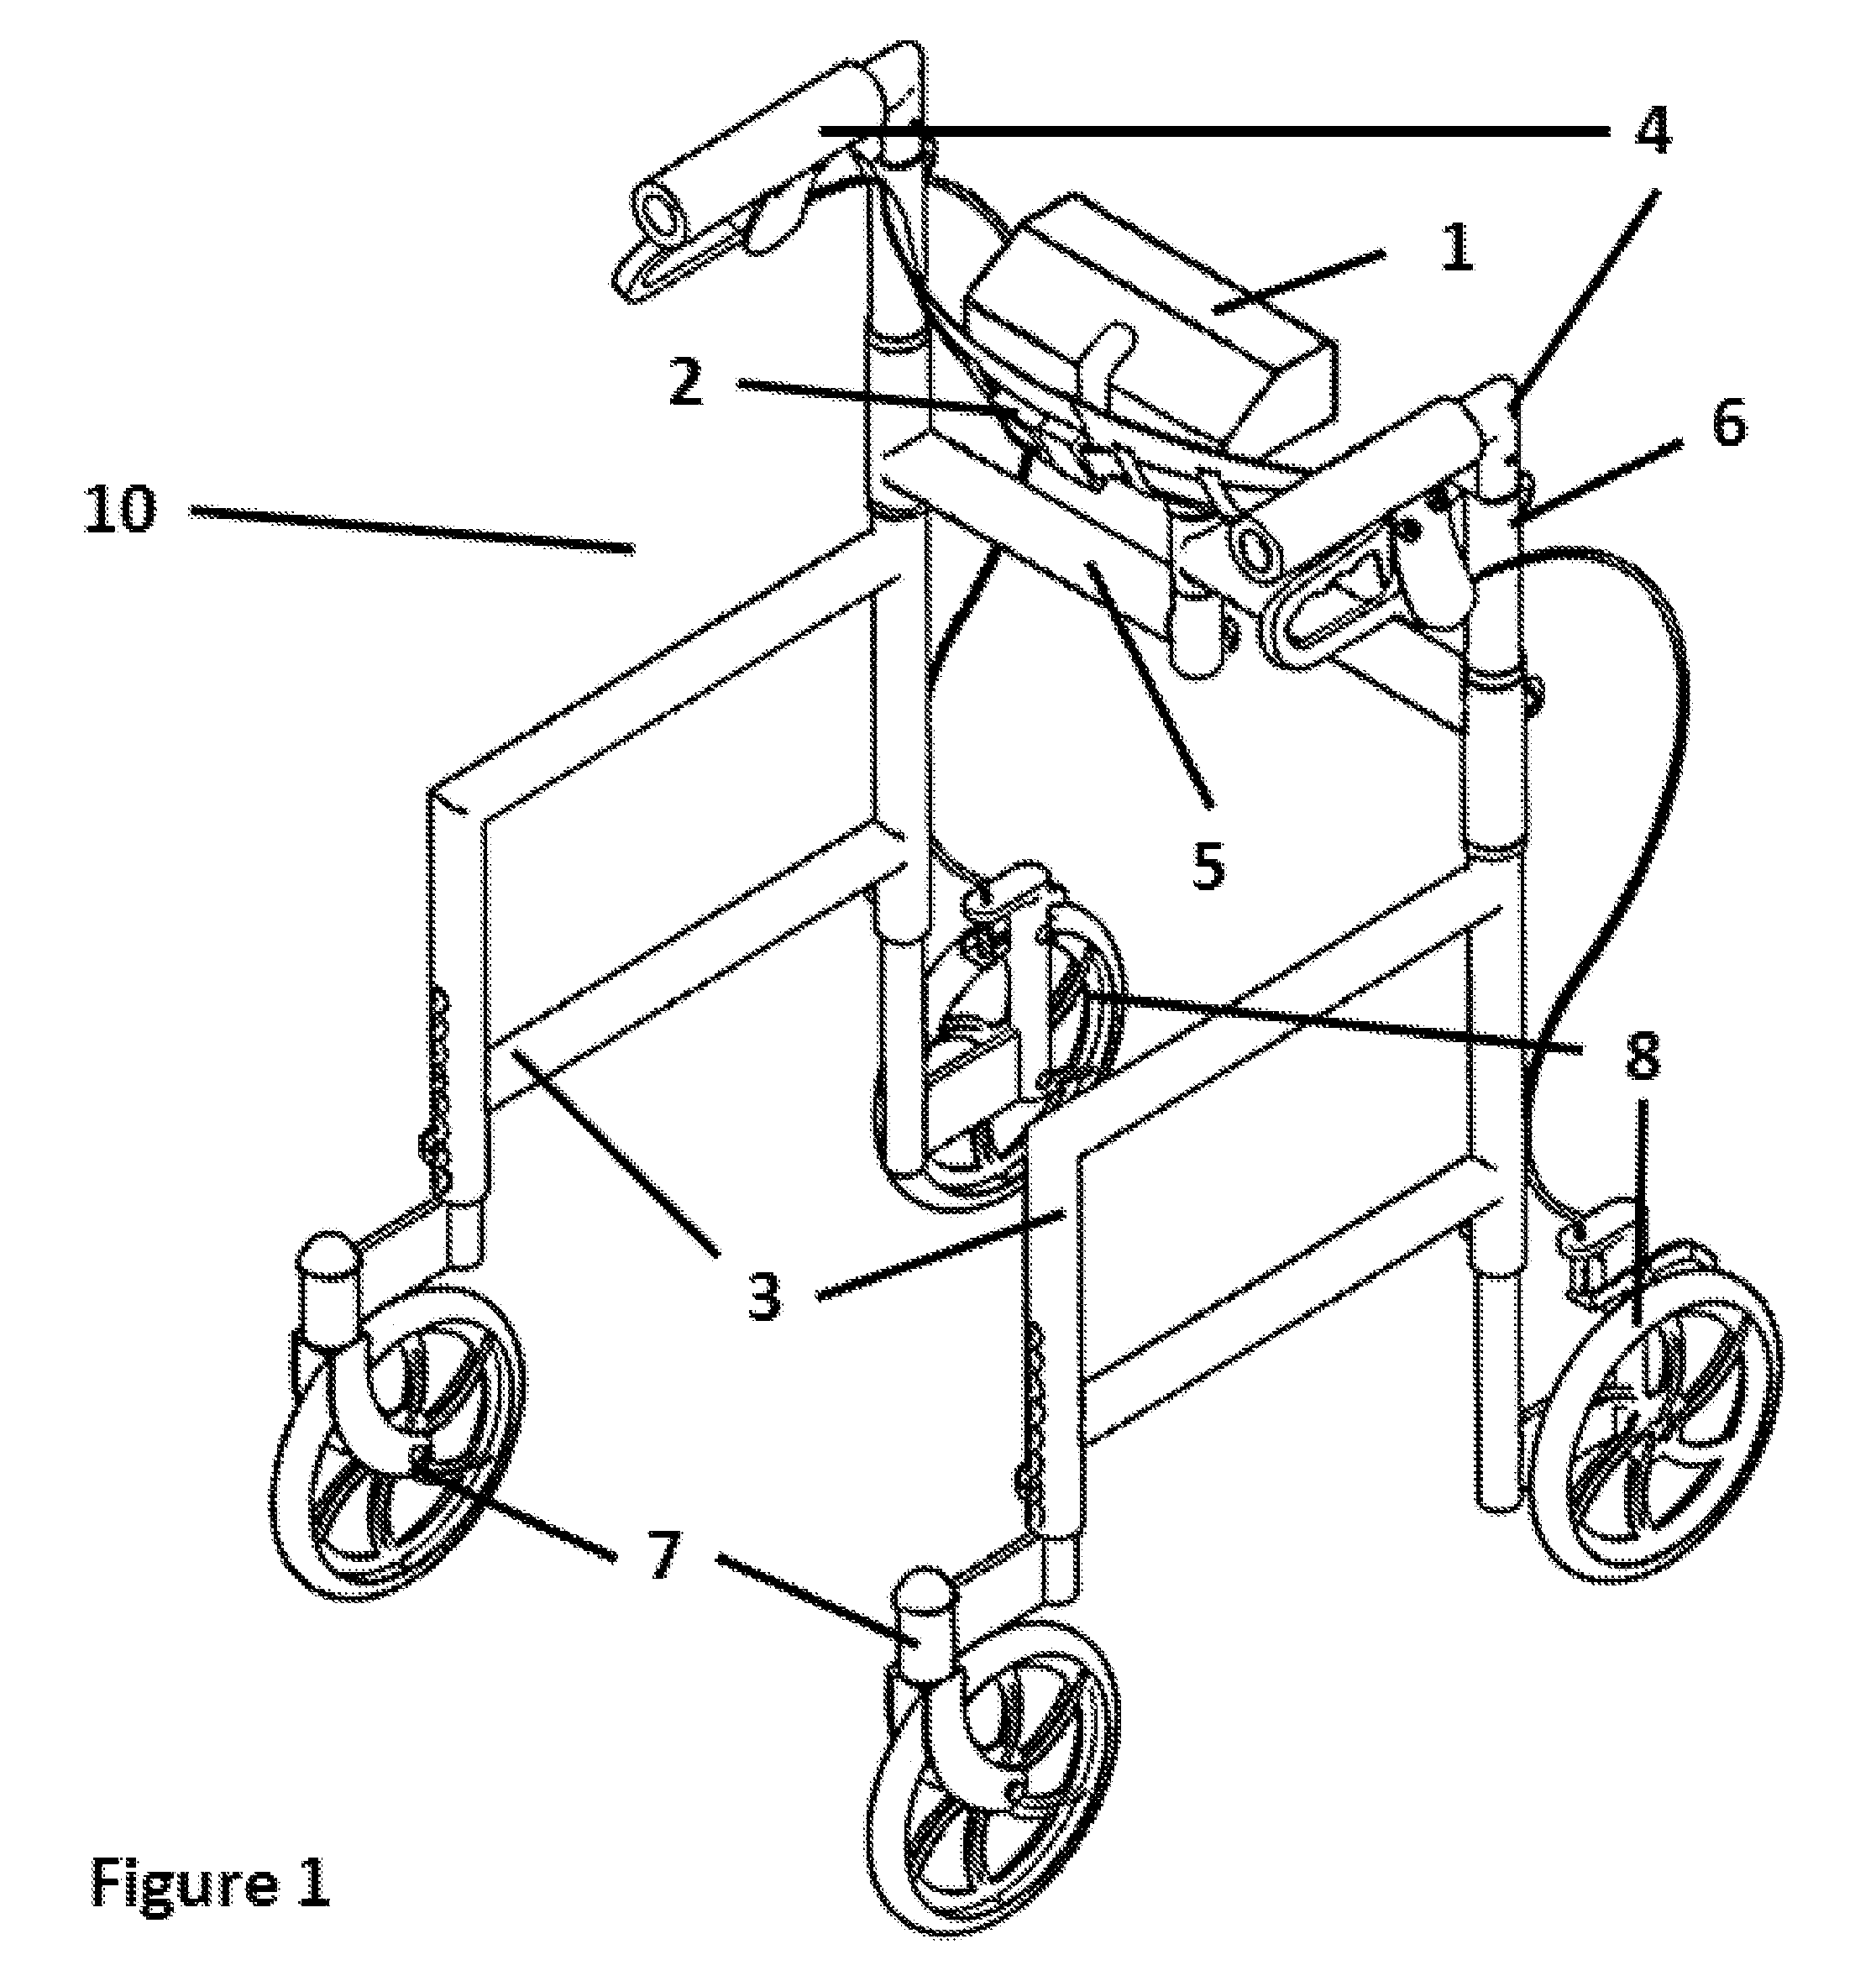 Mobility Assistance Device